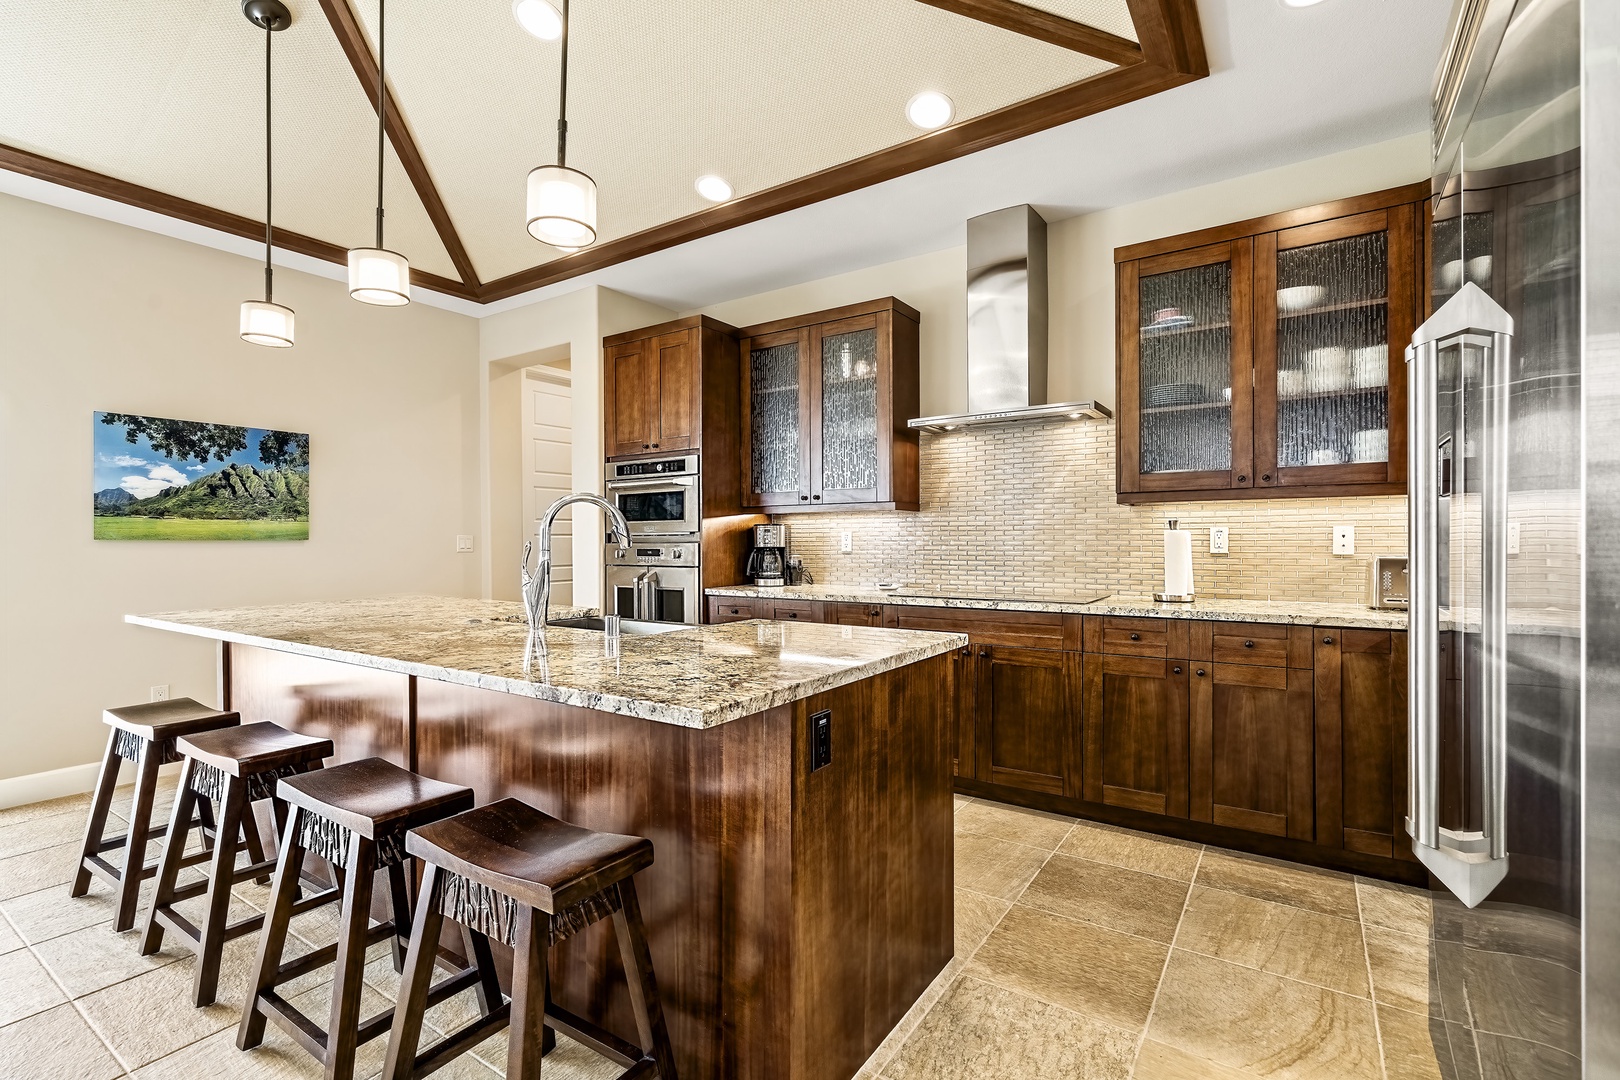 Kailua Kona Vacation Rentals, Green/Blue Combo - Gourmet kitchen with high end appliances